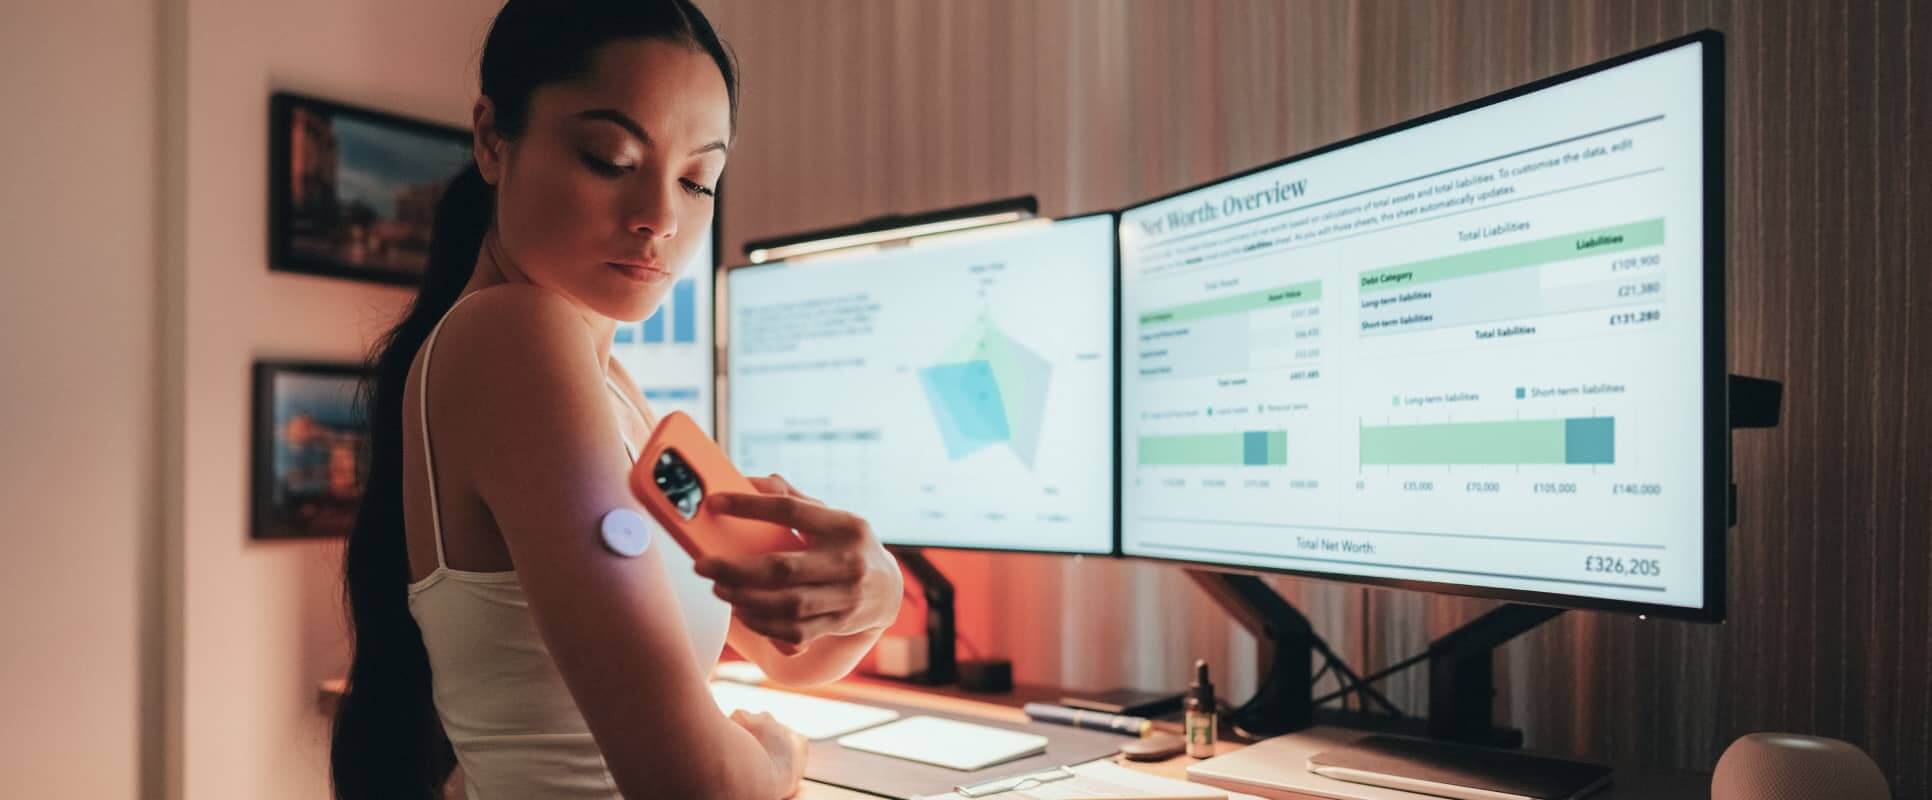 Connected Care: How IoT is Transforming the Healthcare Industry